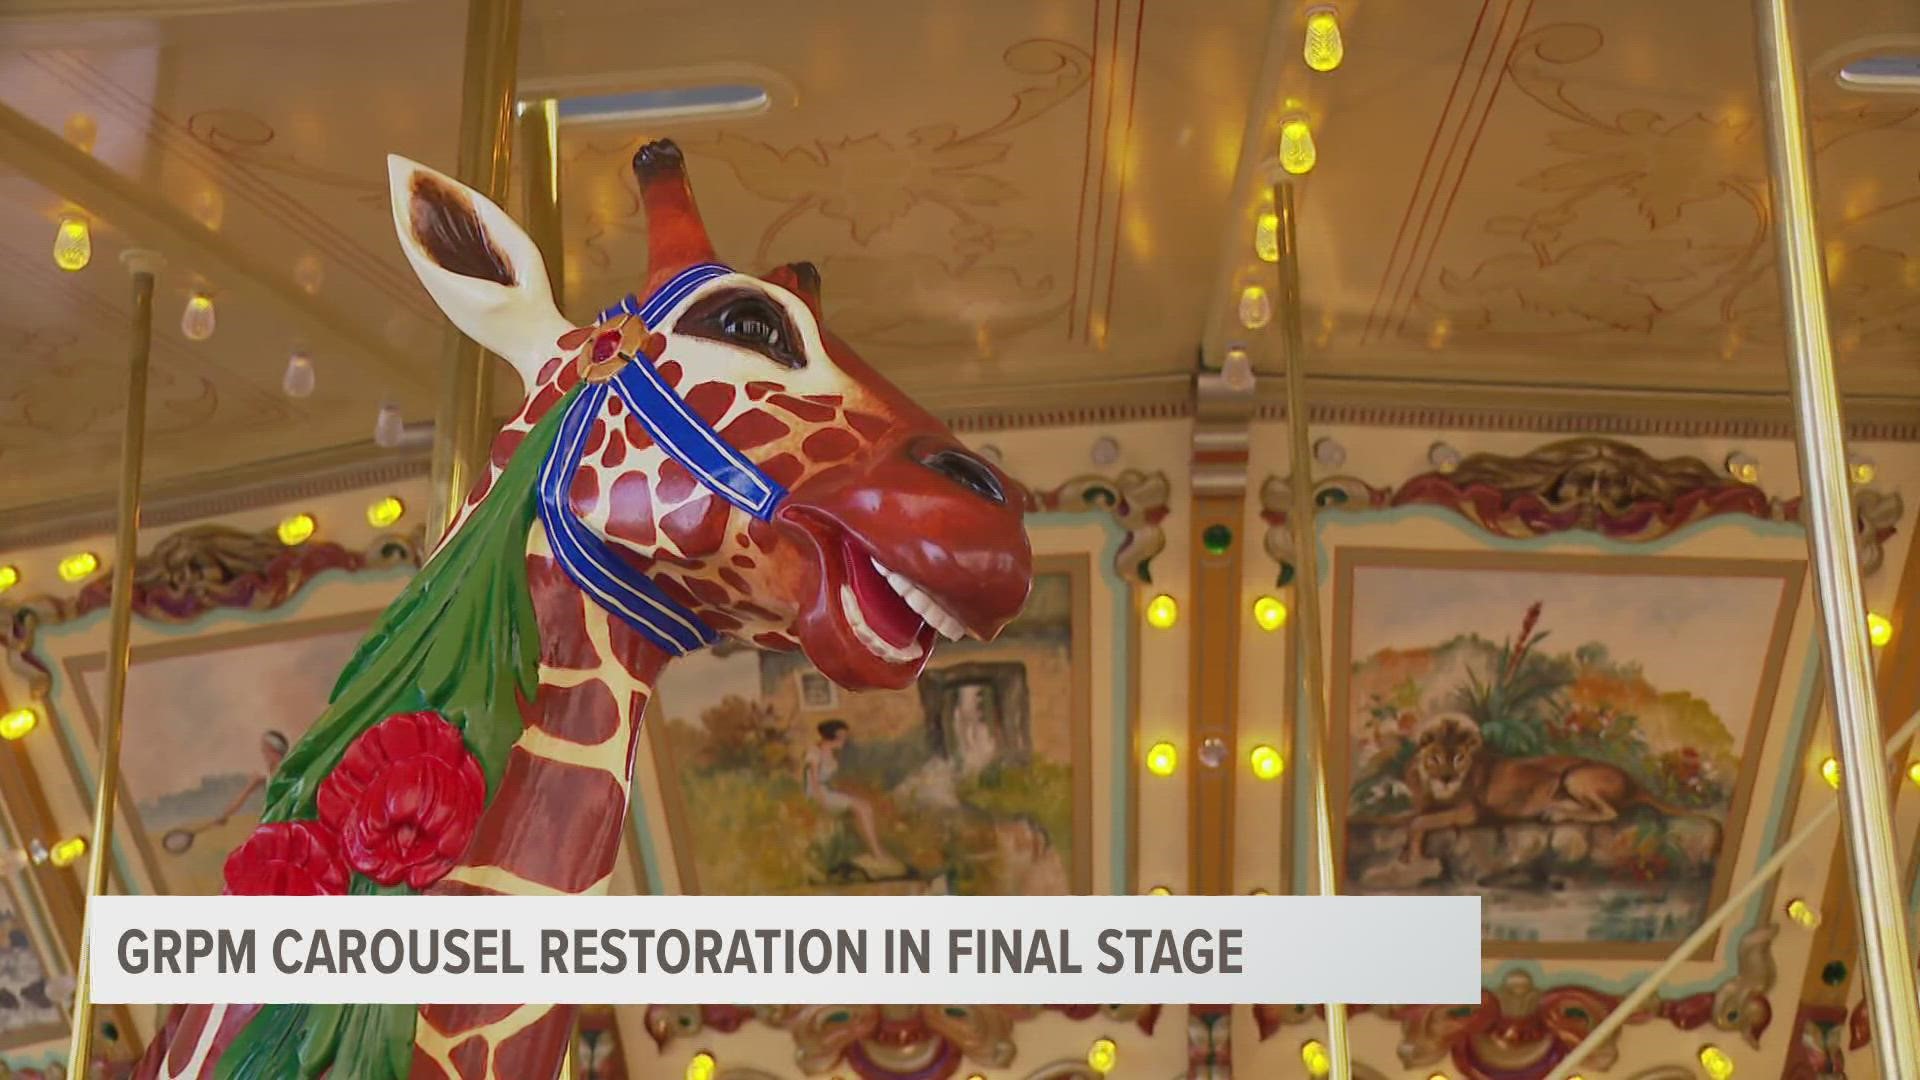 The carousel has been closed since 2020 and restoration began in 2017. It's still unclear when it will reopen. The Carousel is nearly 100 years old.